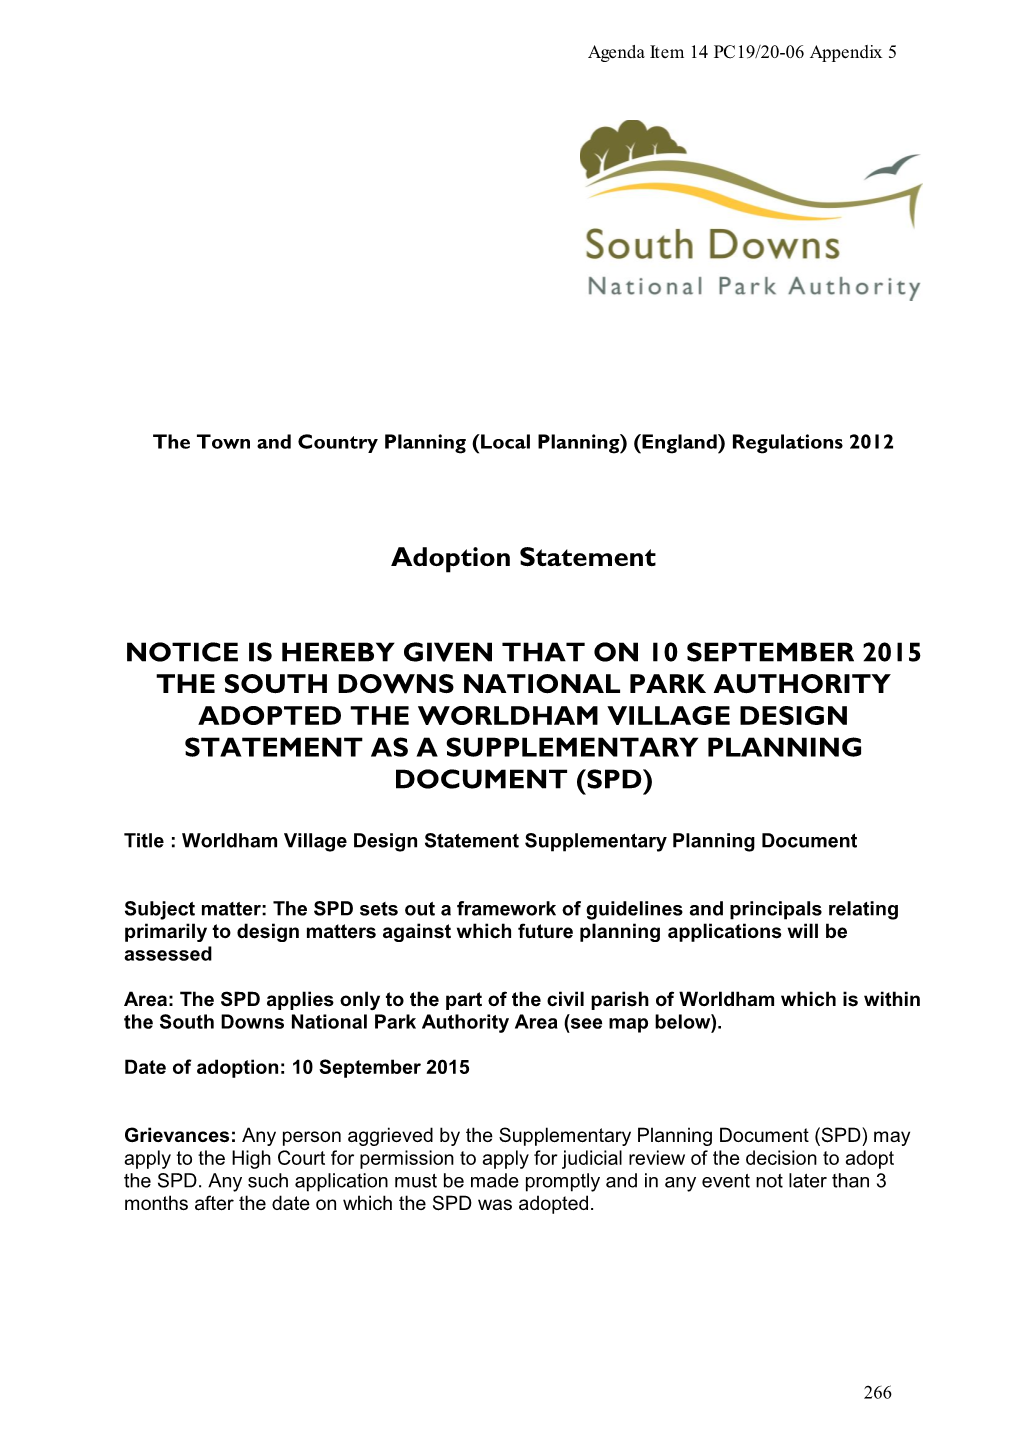 Adoption Statement NOTICE IS HEREBY GIVEN THAT on 10 SEPTEMBER 2015 the SOUTH DOWNS NATIONAL PARK AUTHORITY ADOPTED the WORLDHAM